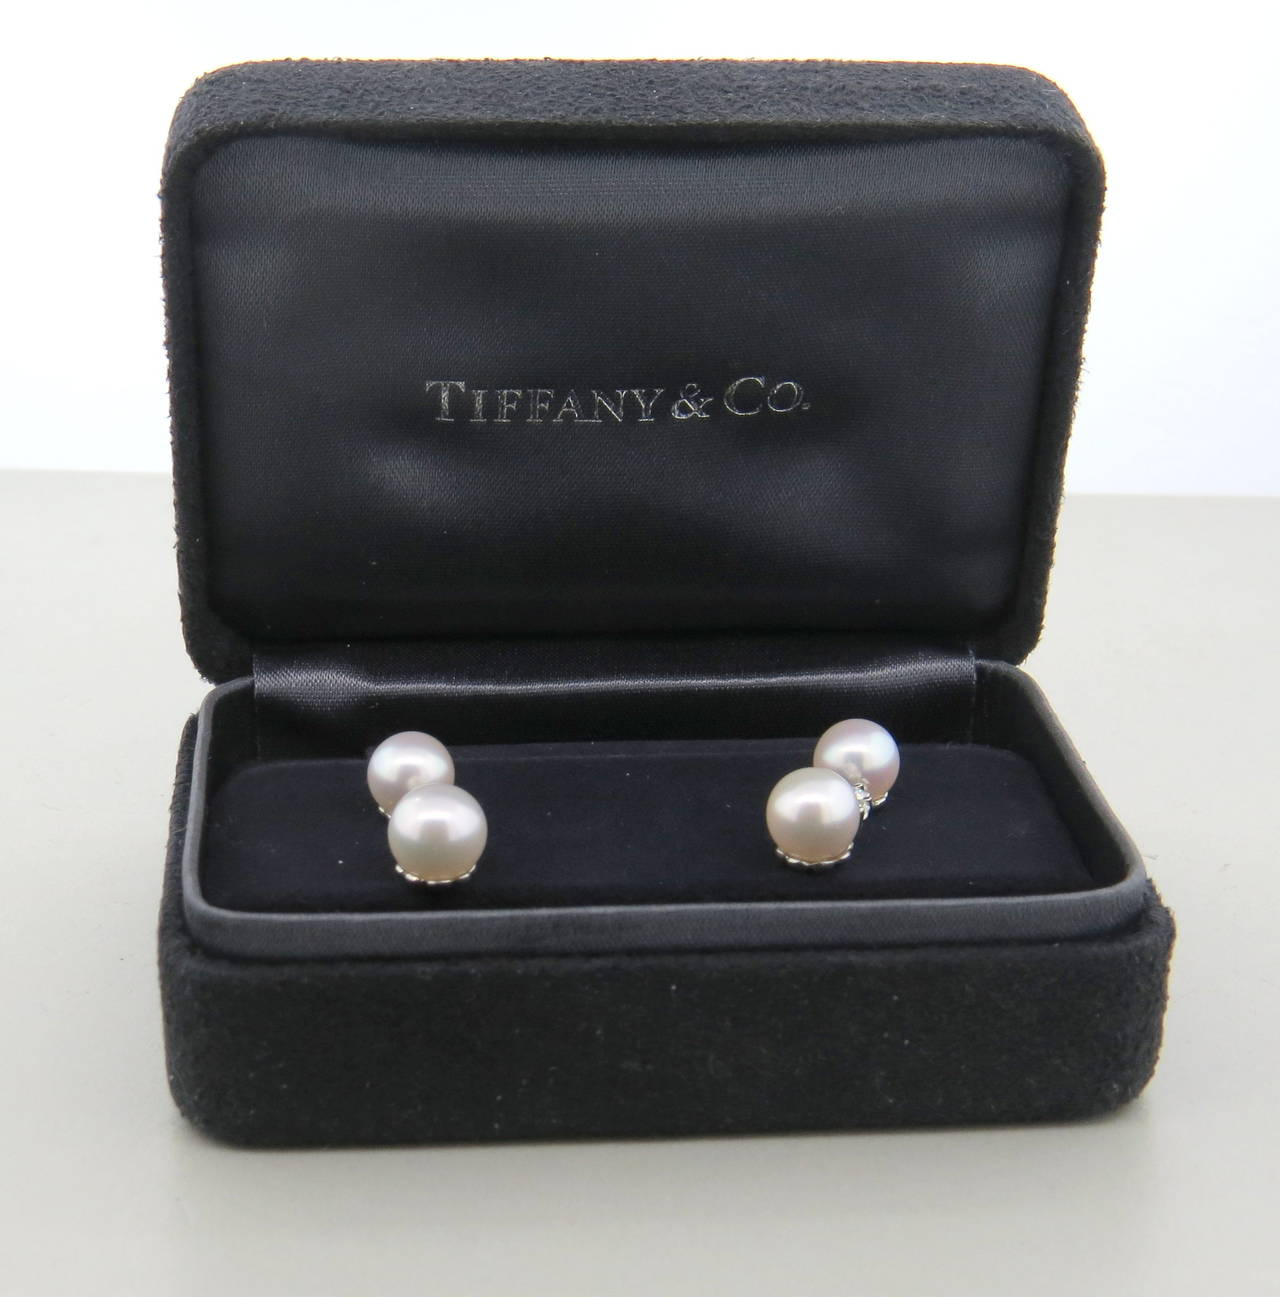 Tiffany & Co. platinum drop earrings from Aria collection, featuring 7.6mm pearls and approx. 0.27ctw in G/VS diamonds. Earrings are21mn long. Marked pt950 and T & Co. Weight - 5.5 grams.

Come in Tiffany box, currently retail for $3200